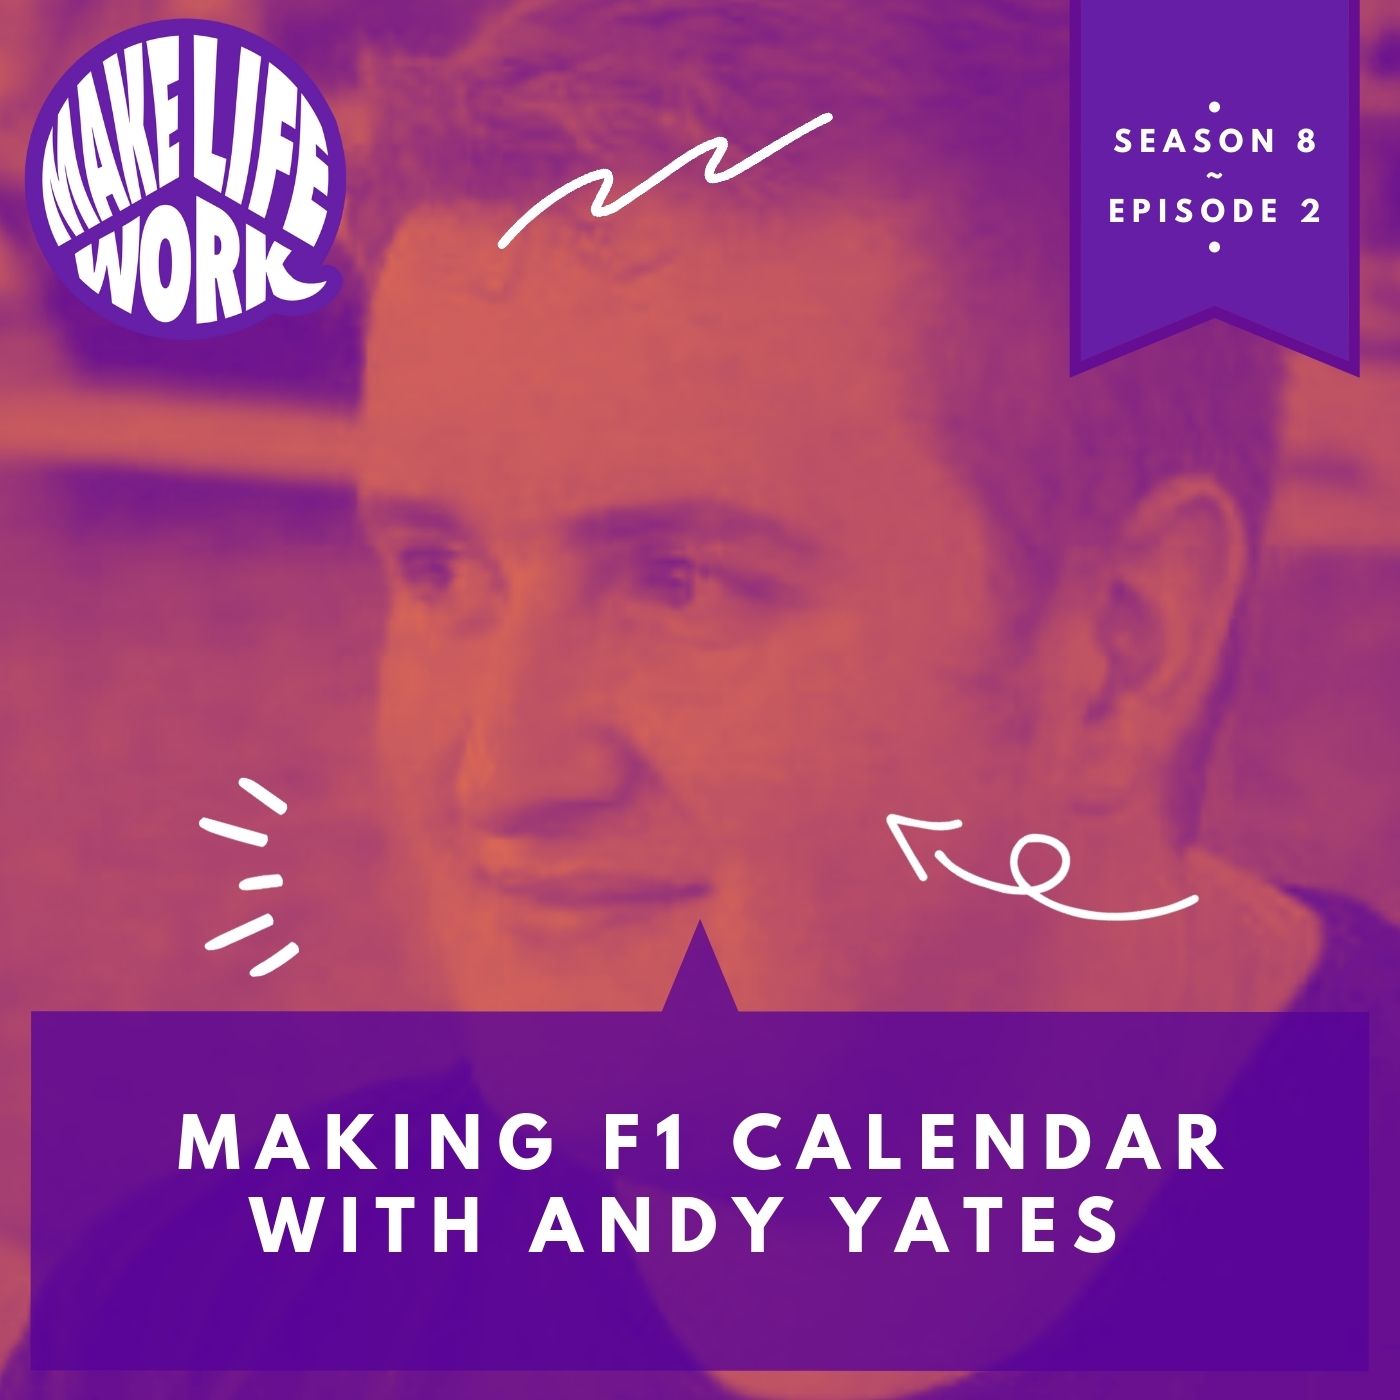 Making F1 Calendar with Andy Yates